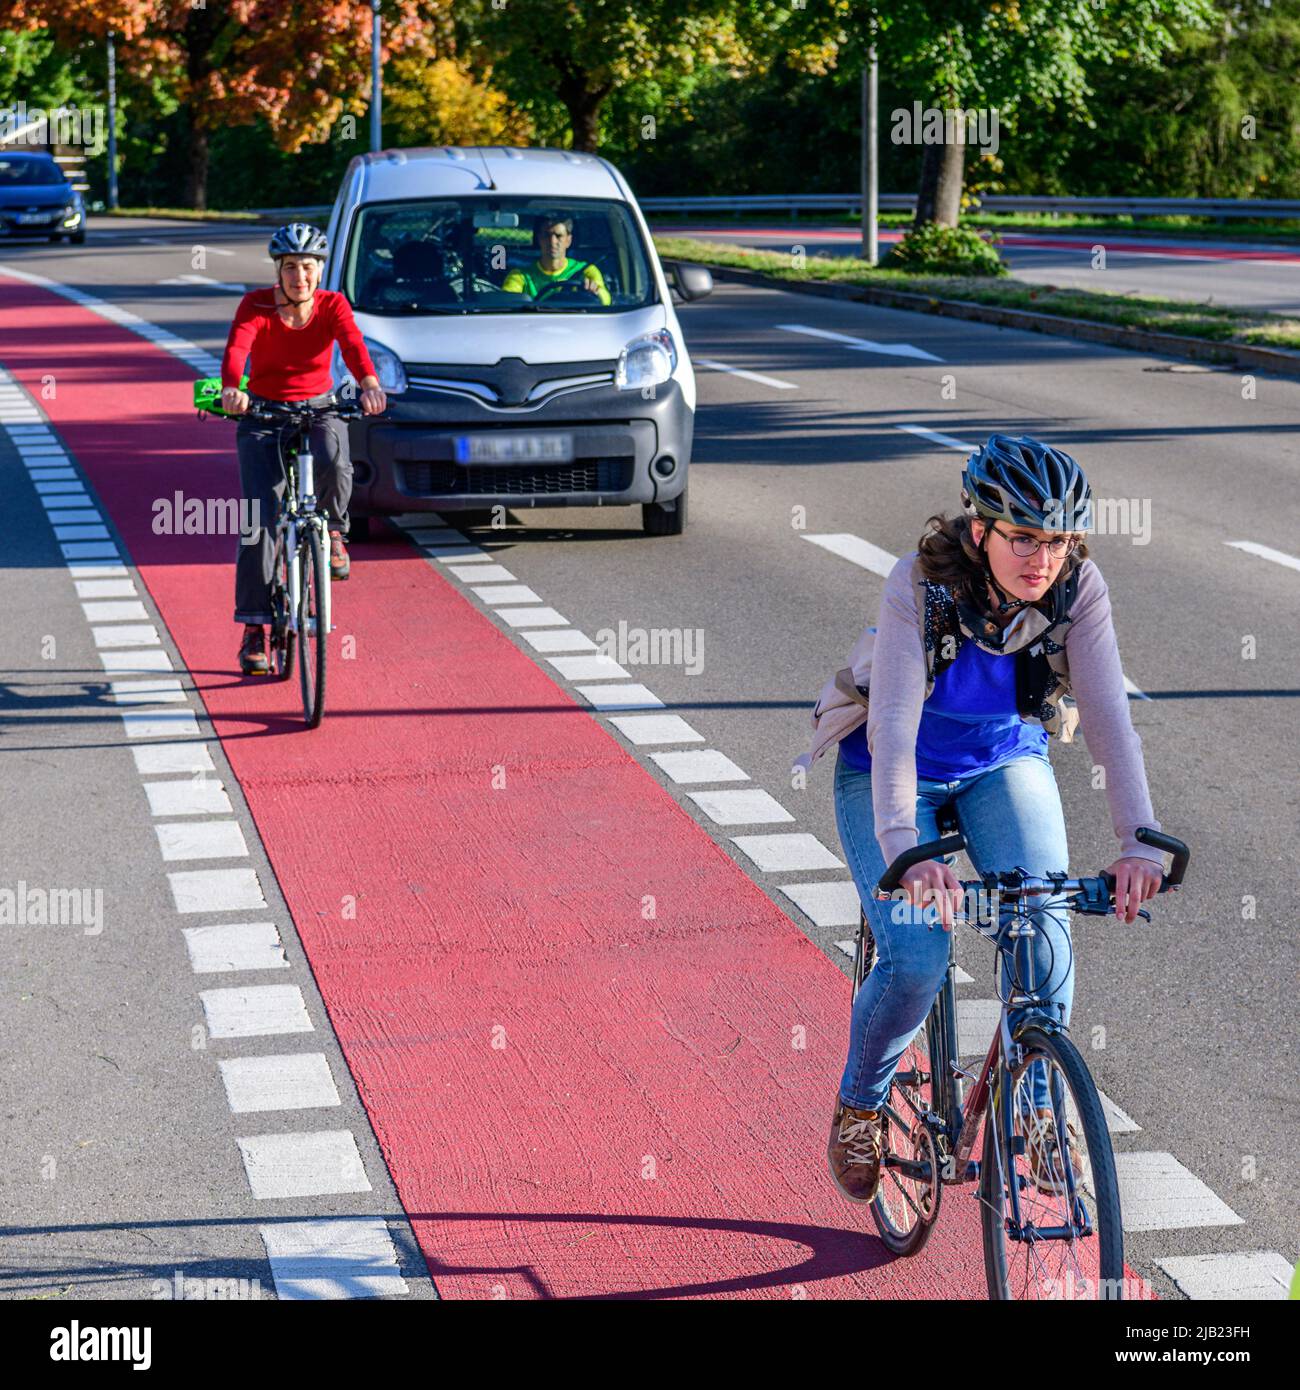 Mobility by bicycle and pedelec in urban areas - a challenge for future transport planning. Stock Photo